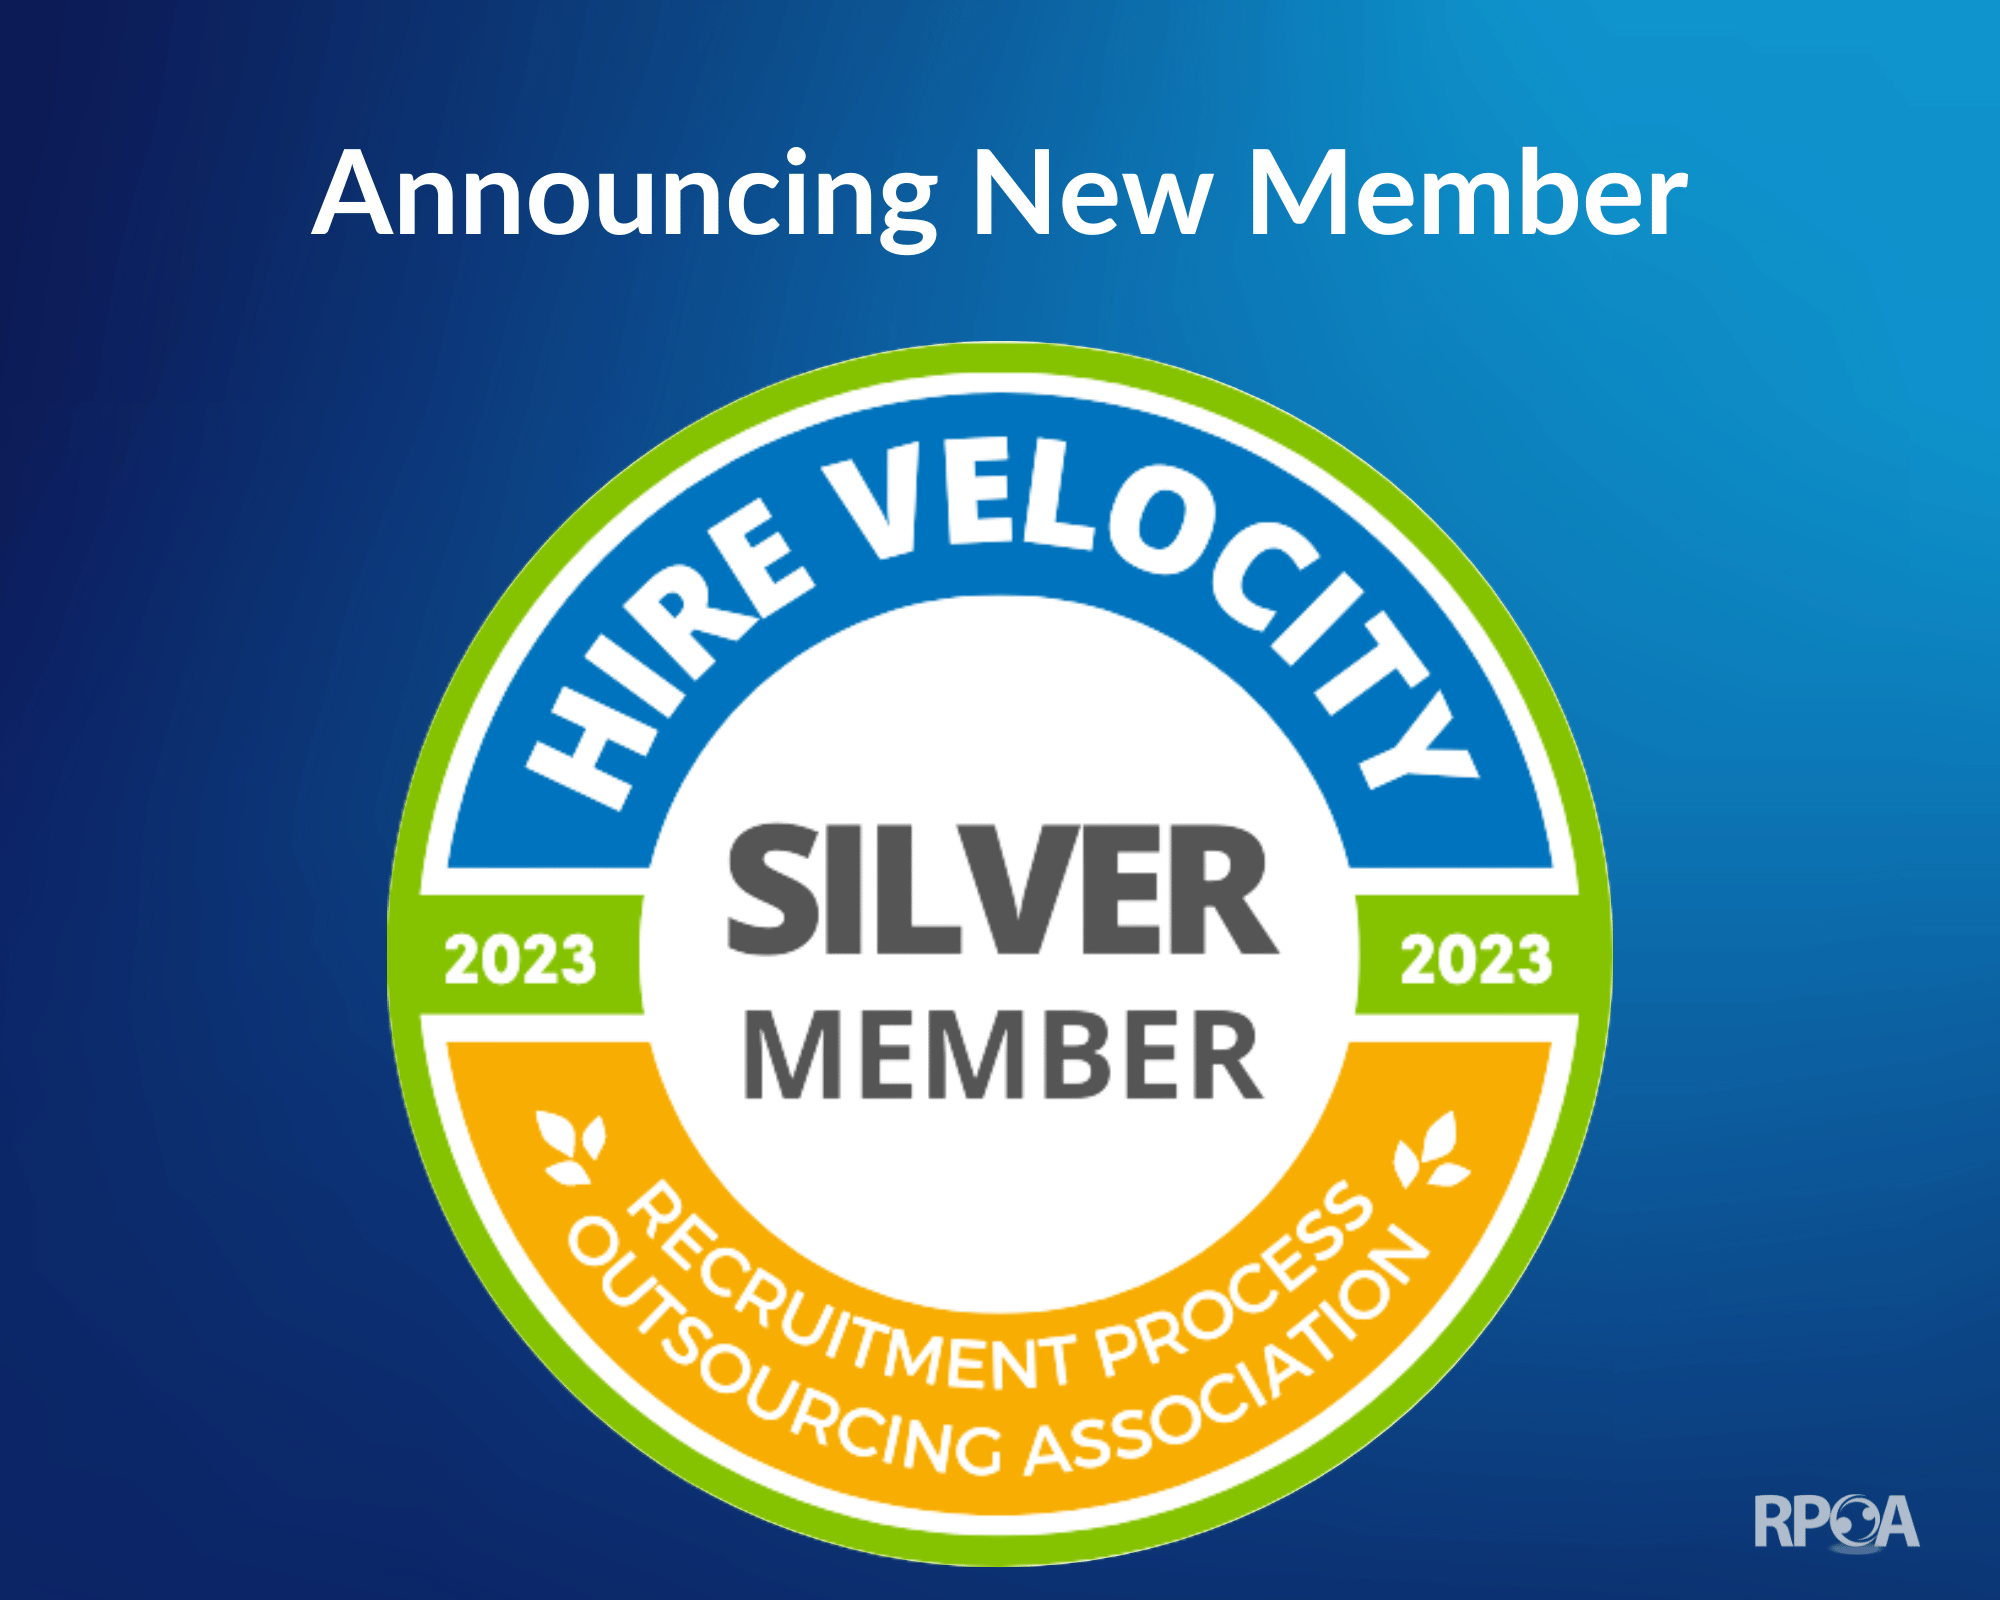 Hire Velocity Joins the RPOA as a New Silver Member